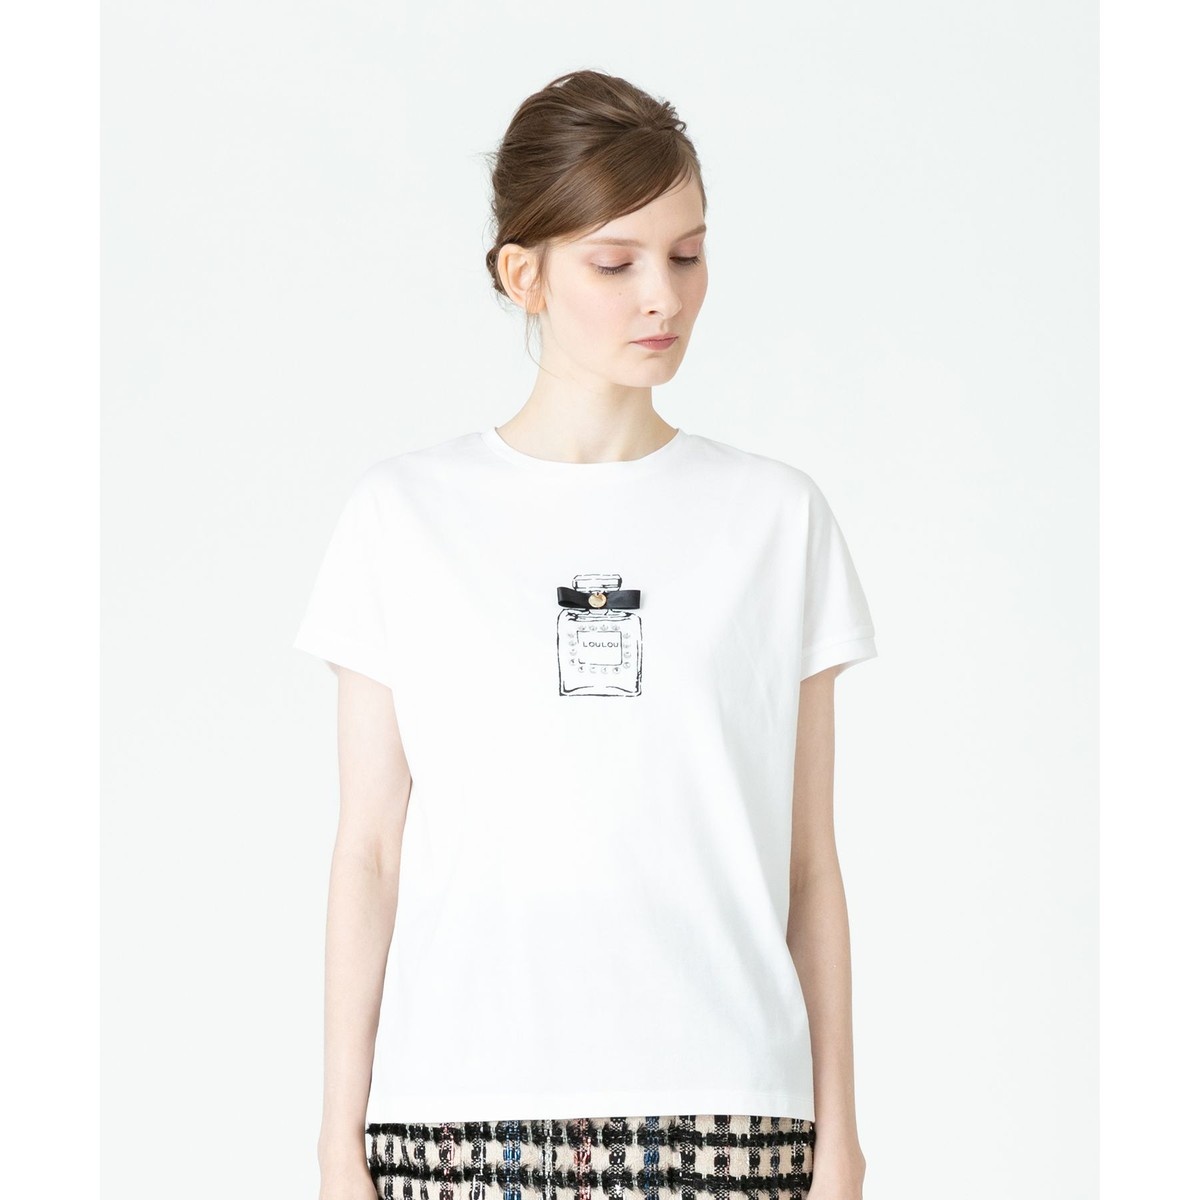 LOULOU Tシャツ